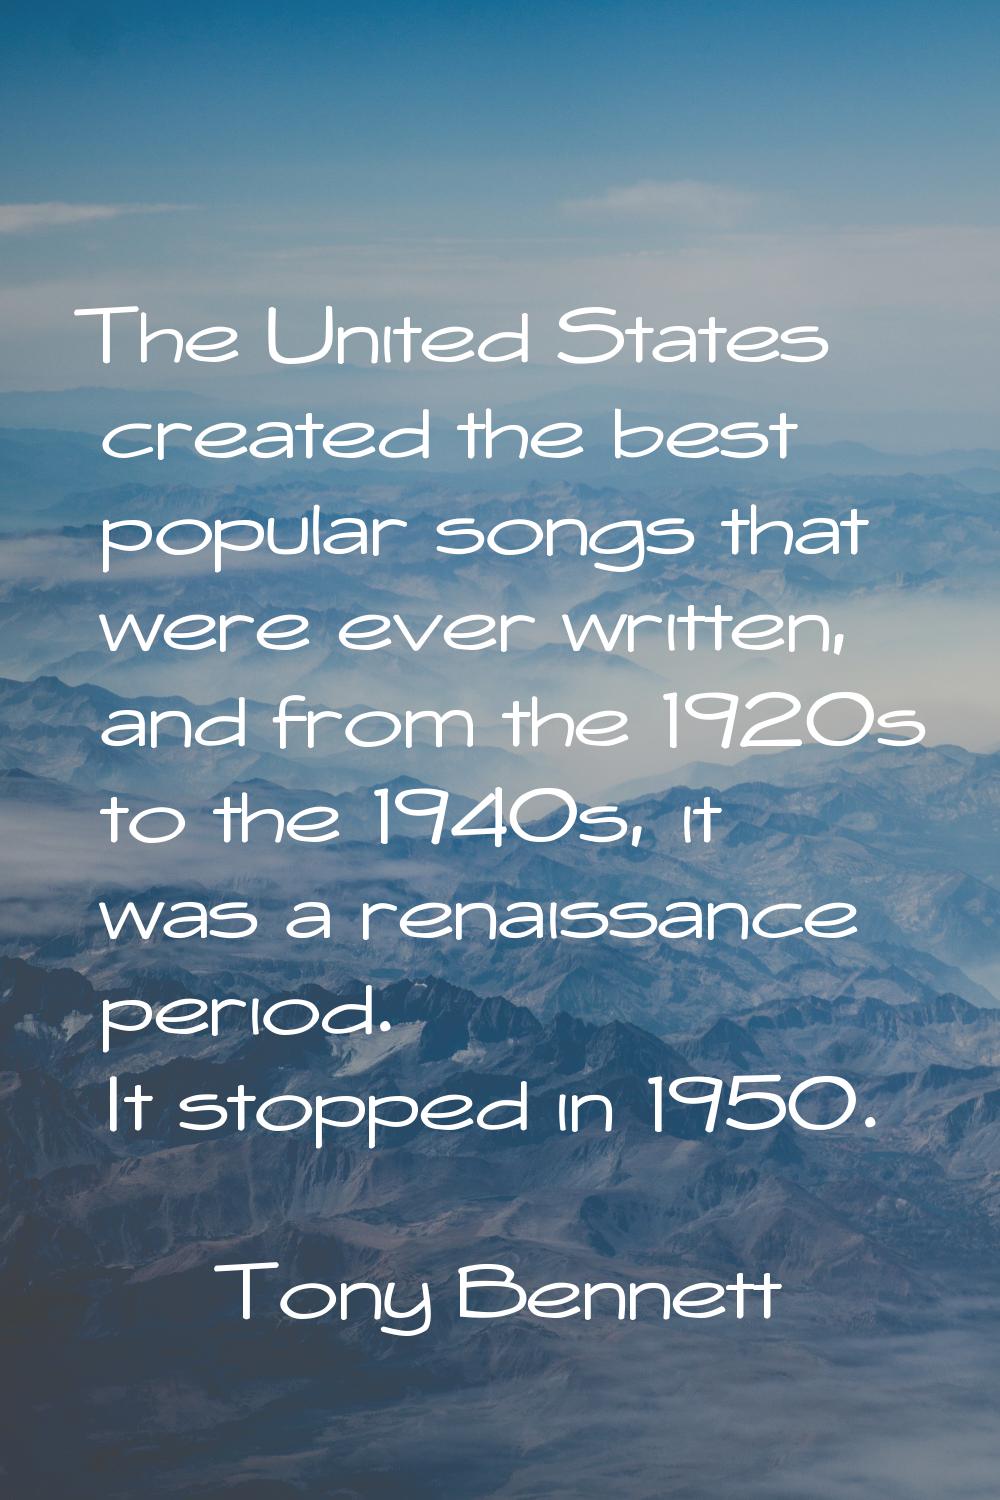 The United States created the best popular songs that were ever written, and from the 1920s to the 